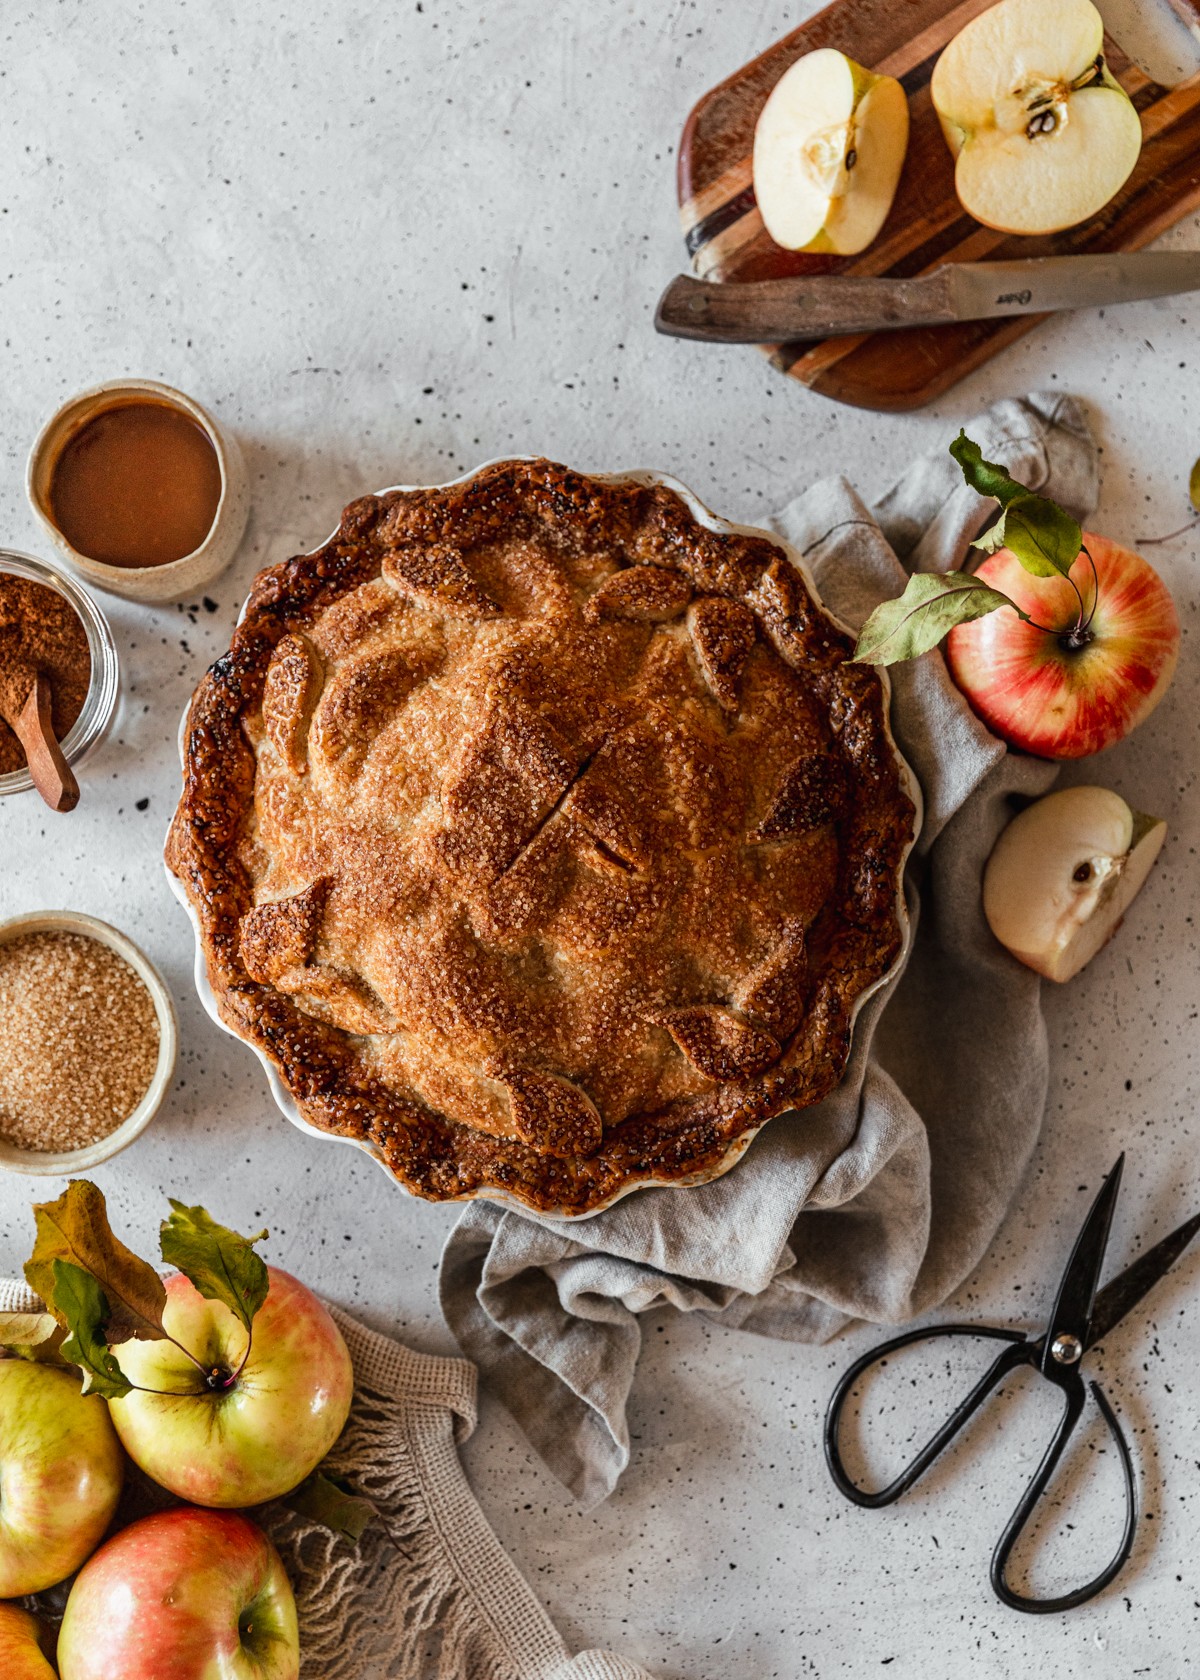 An overhead image of caramel apple pie in a white dish on a white speckled table next to a cutting board with a sliced apple, a few Honeycrisp apples, a bowl of caramel, a jar of apple pie spice, a pair of vintage black scissors, and a beige linen.